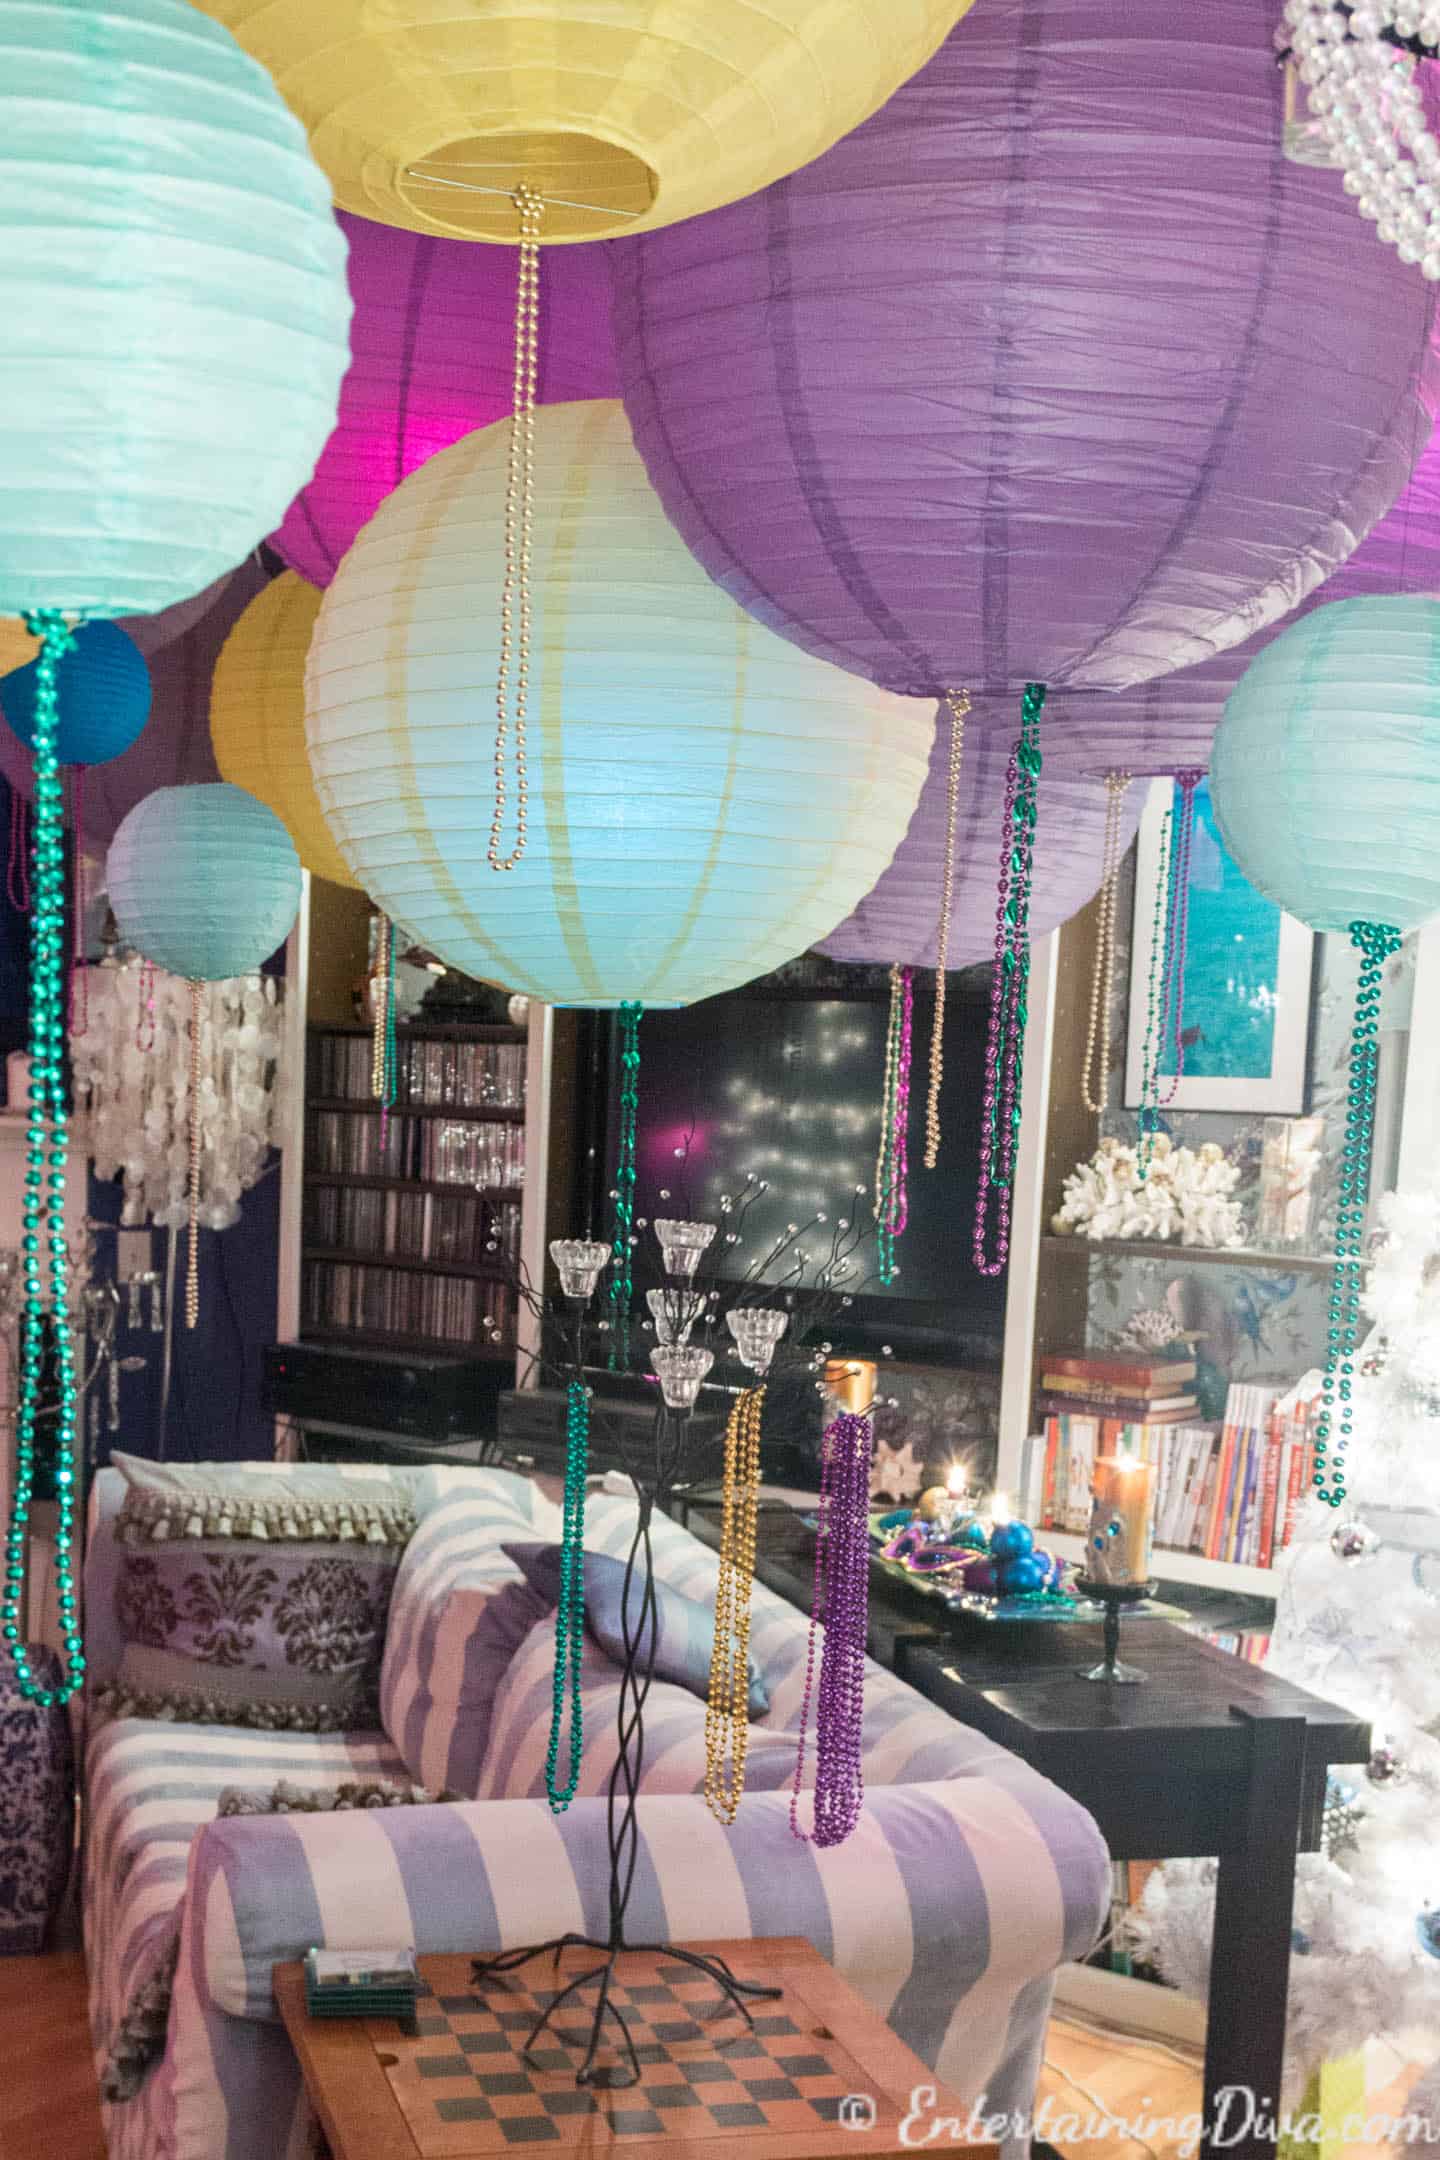 Paper lanterns hung from the ceiling as a last minute New Year's Eve party decoration